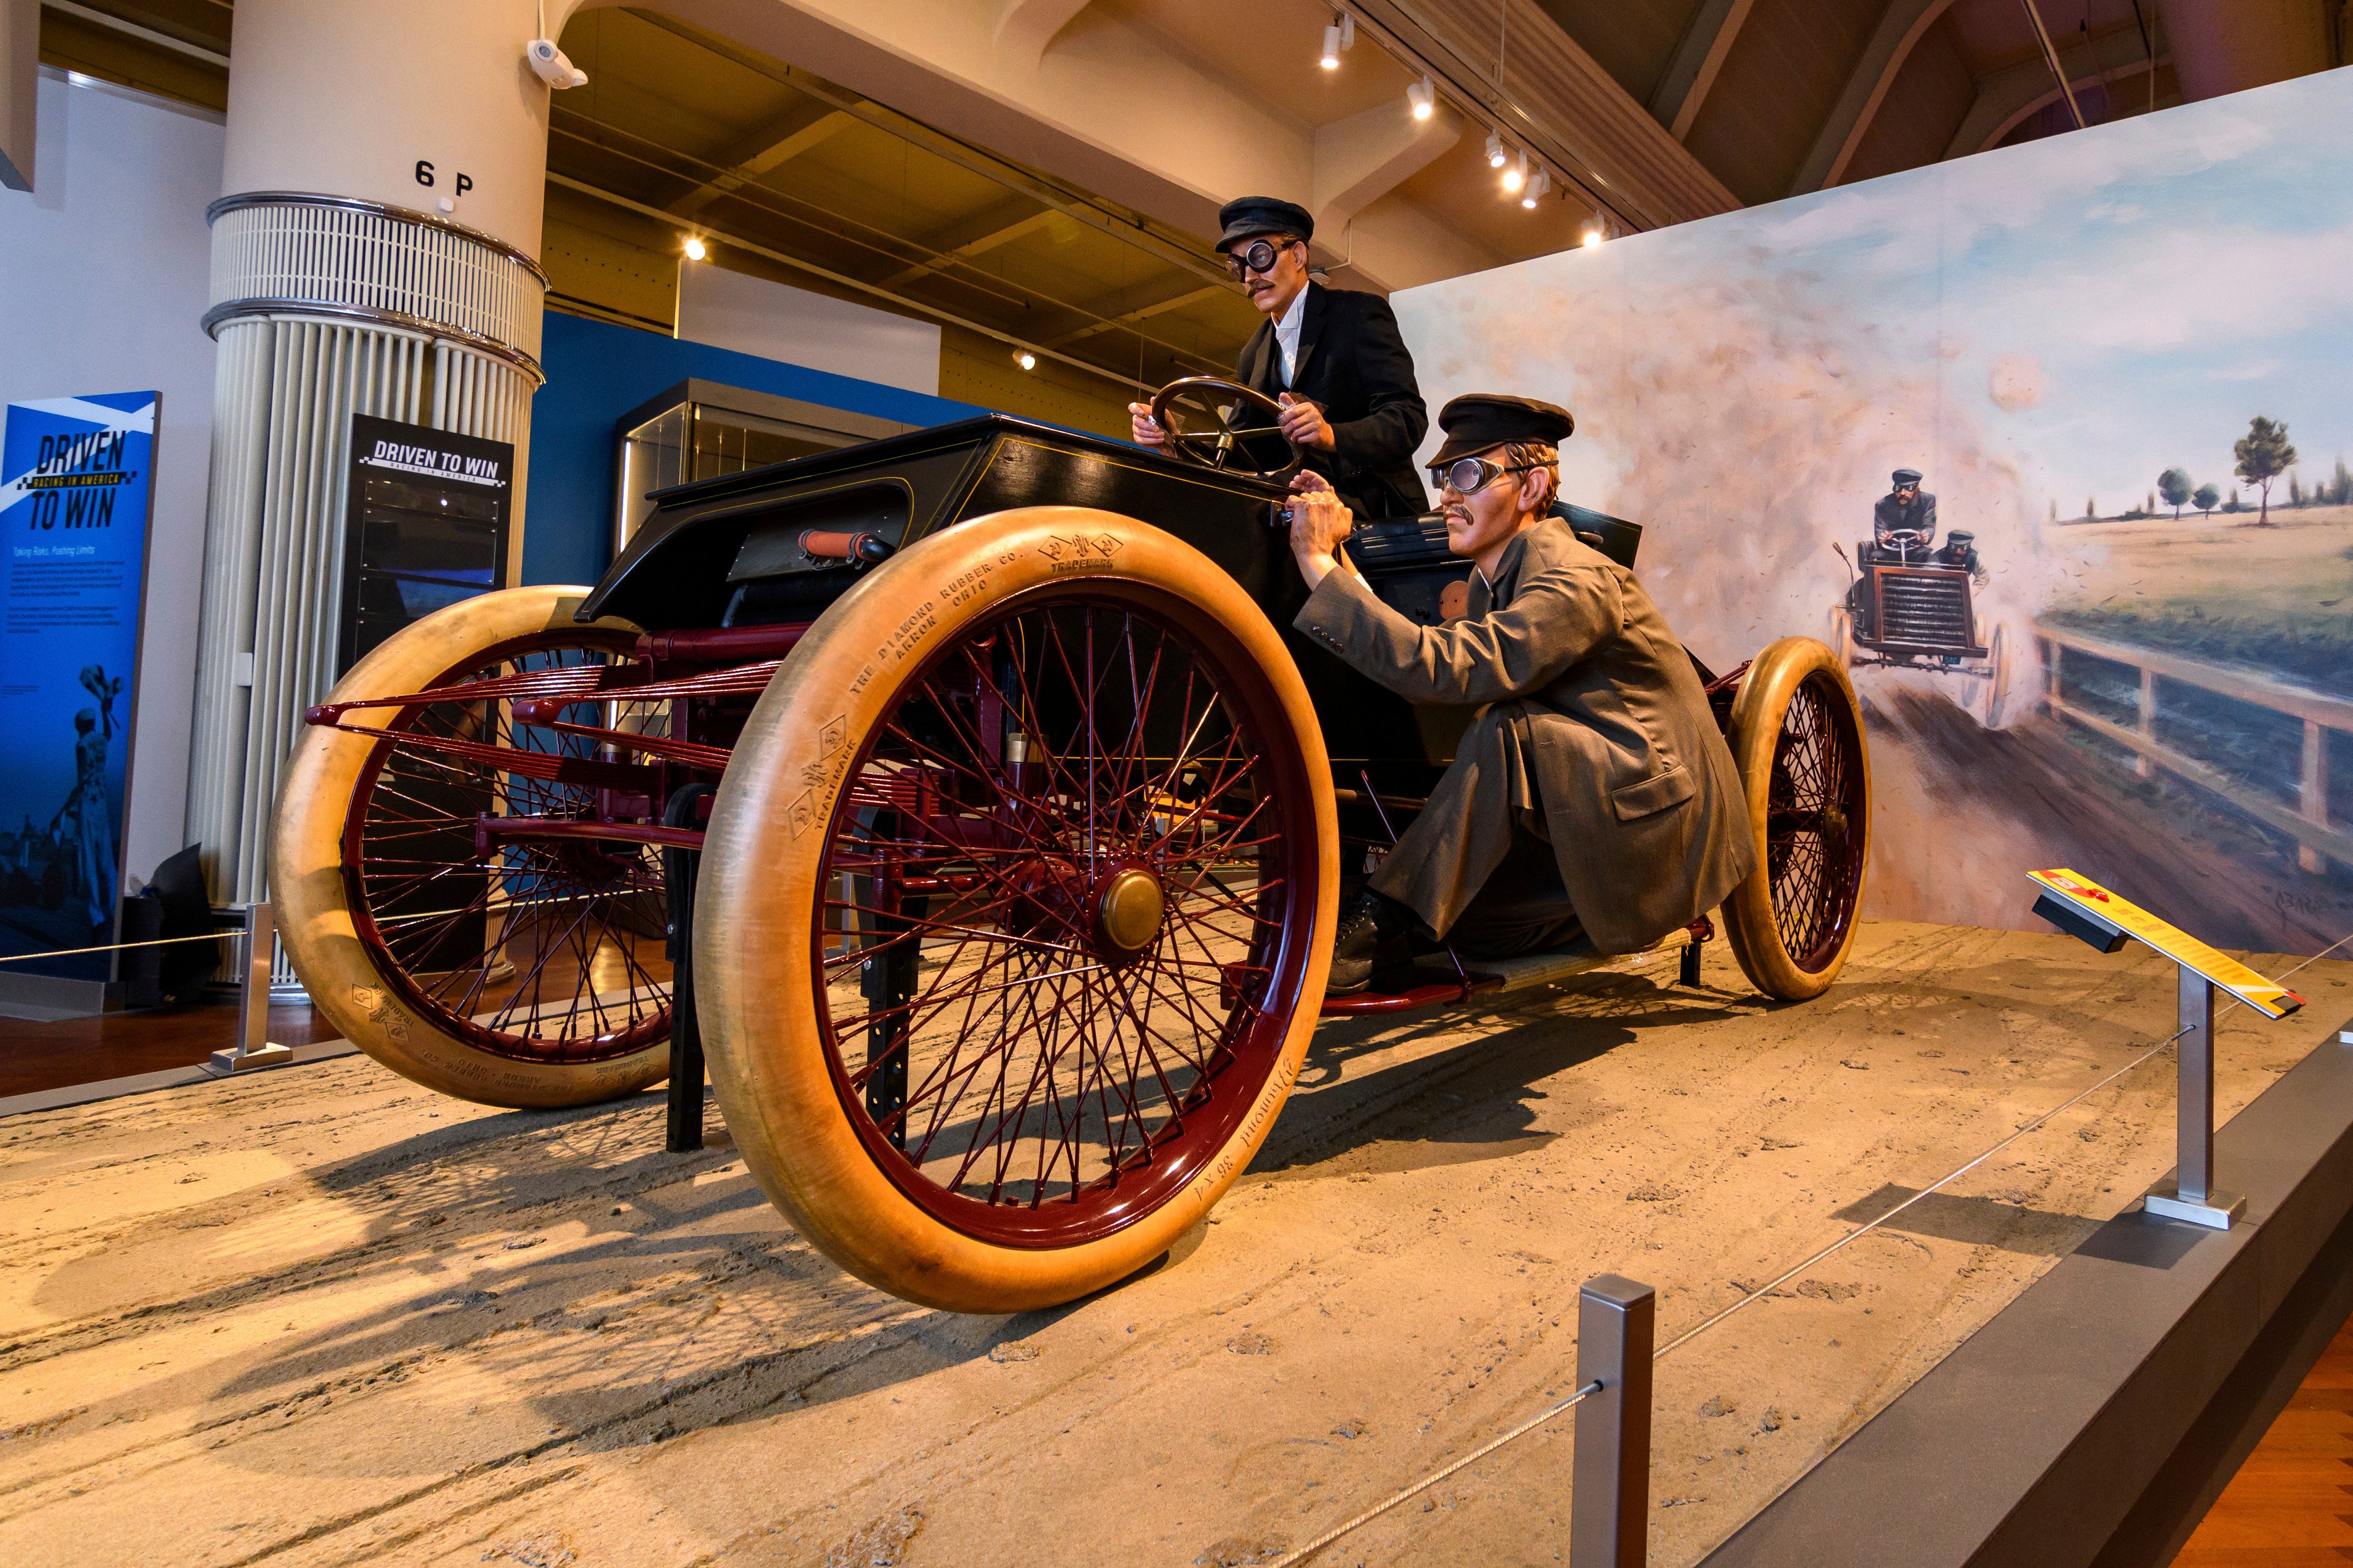 Henry Ford Museum's 'Driven to Win' exhibit celebrates racing in America